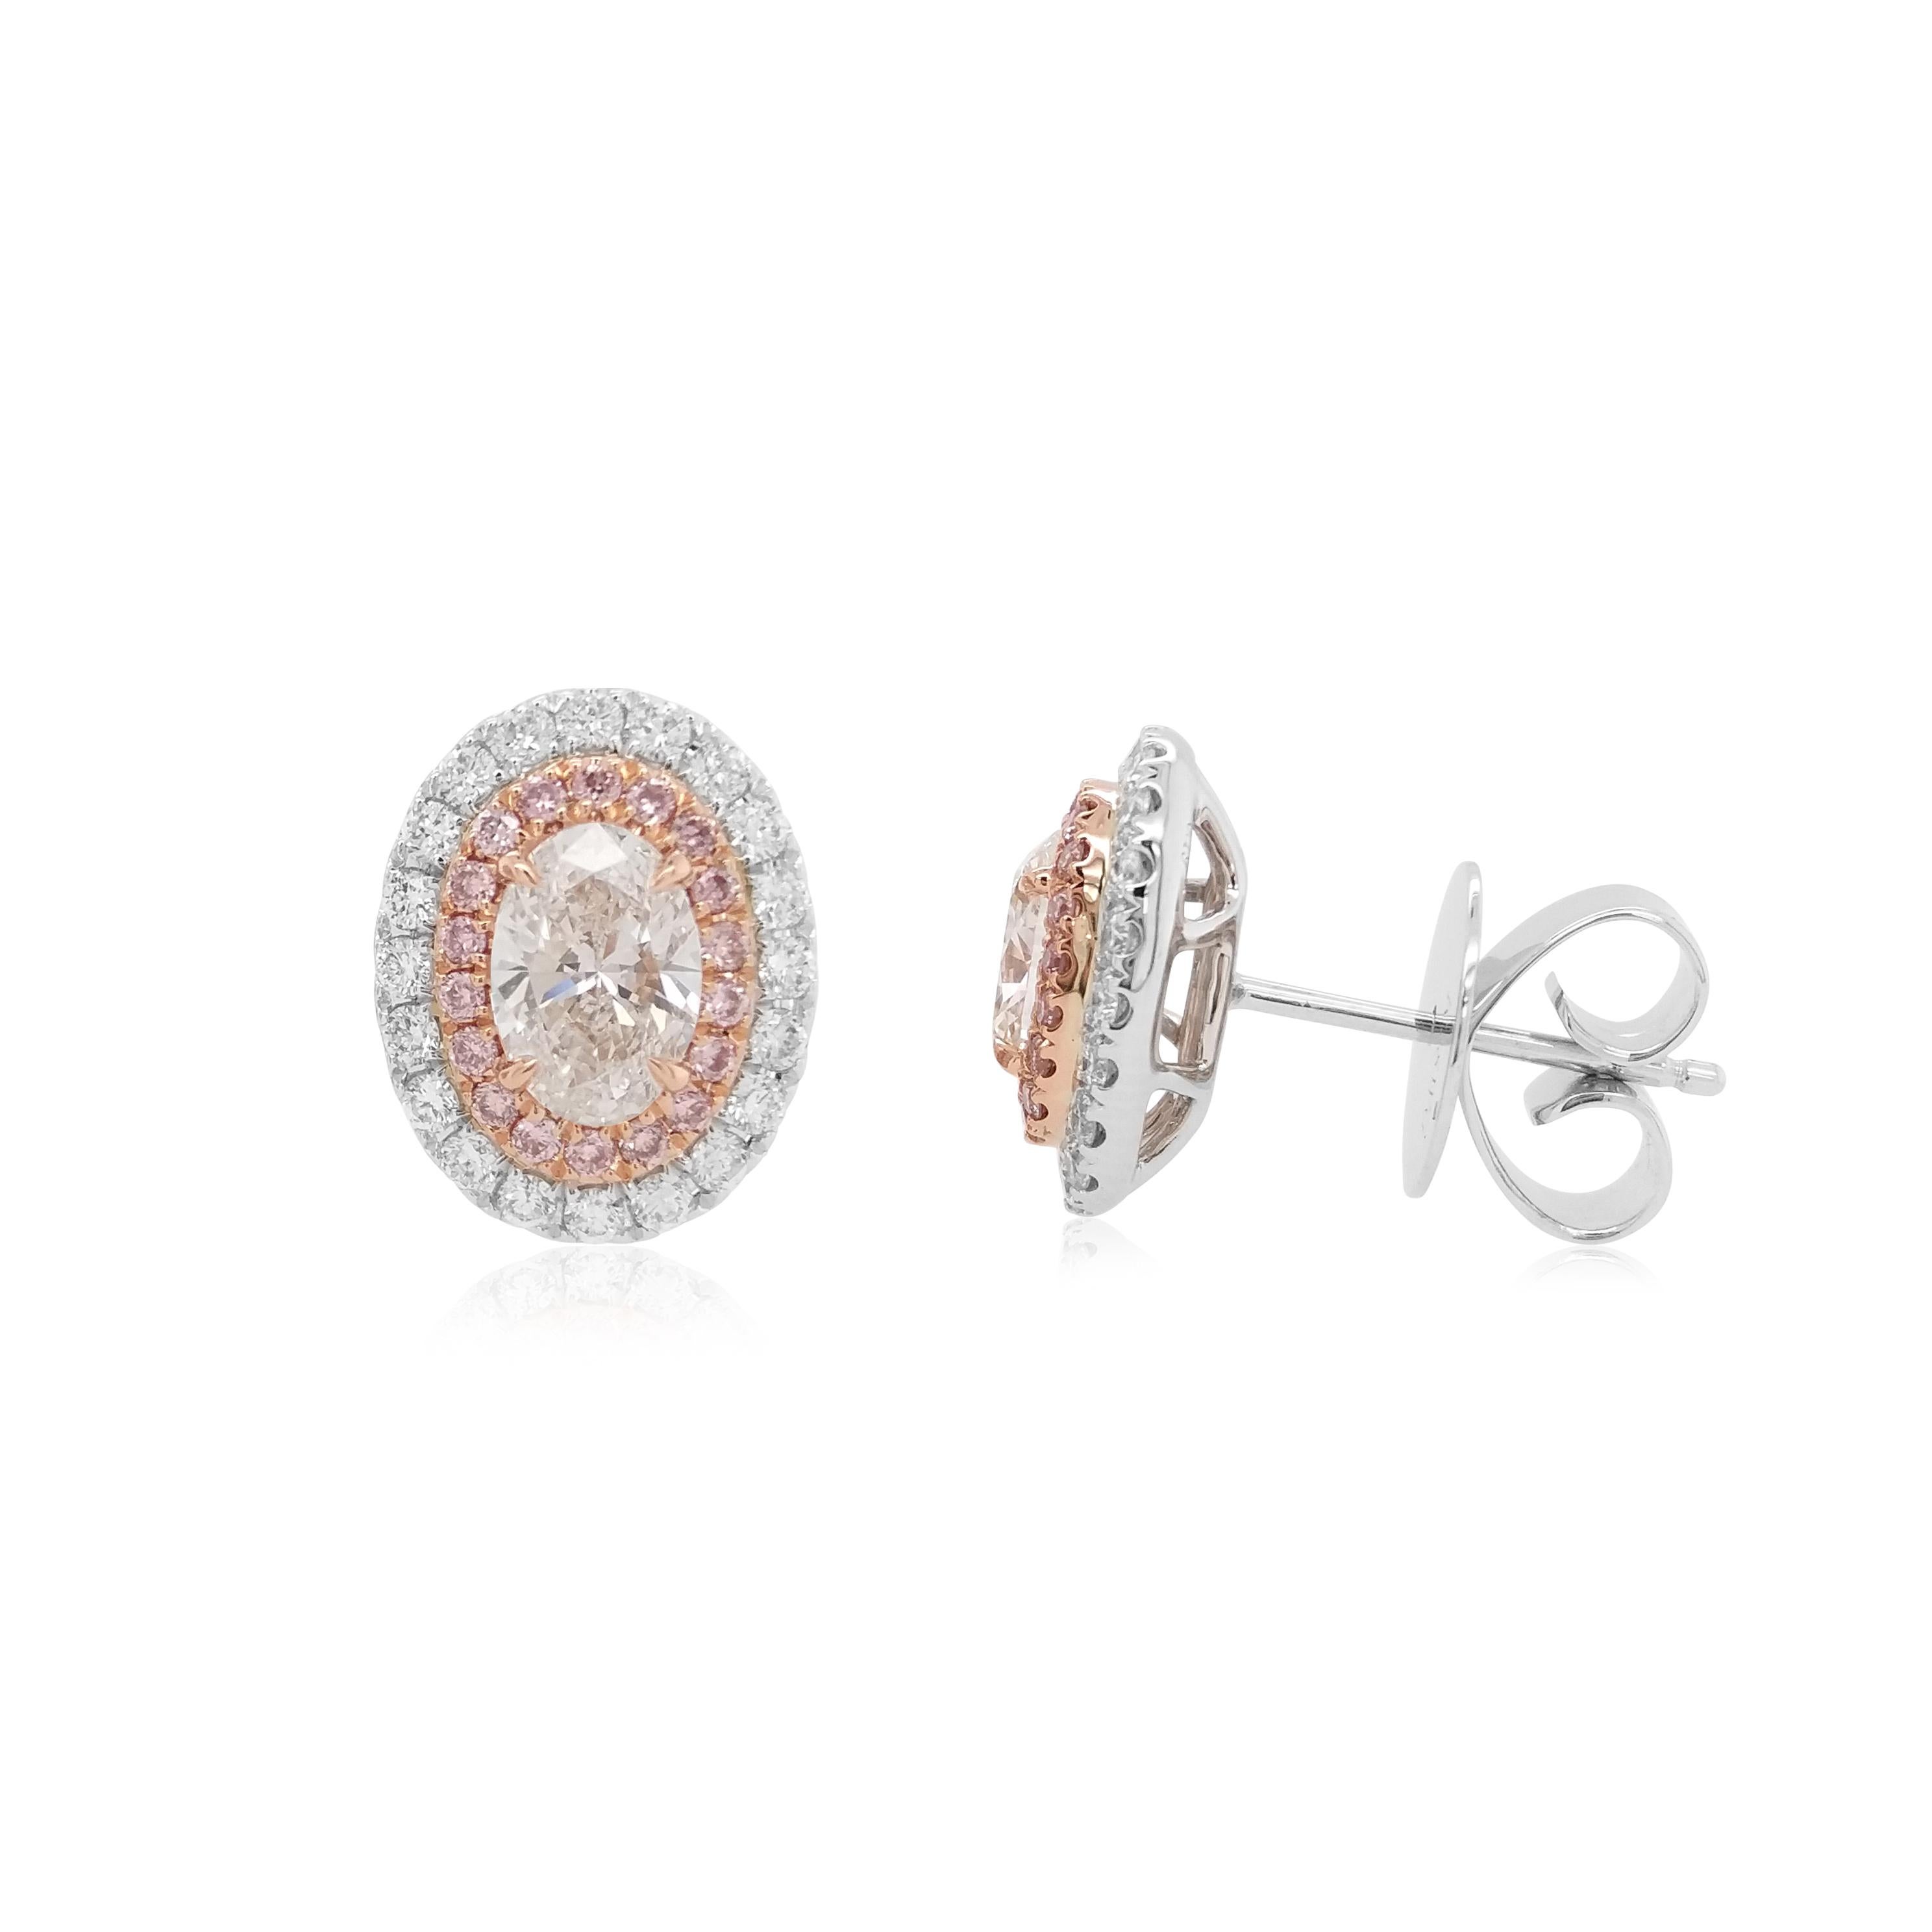 The timeless combination of White Diamond and natural Argyle Pink Diamond has been re-imagined in these charming 18K gold earrings. Featuring excellent quality oval-shape White Diamonds at its centre, surrounded by halos of scintillating Argyle Pink